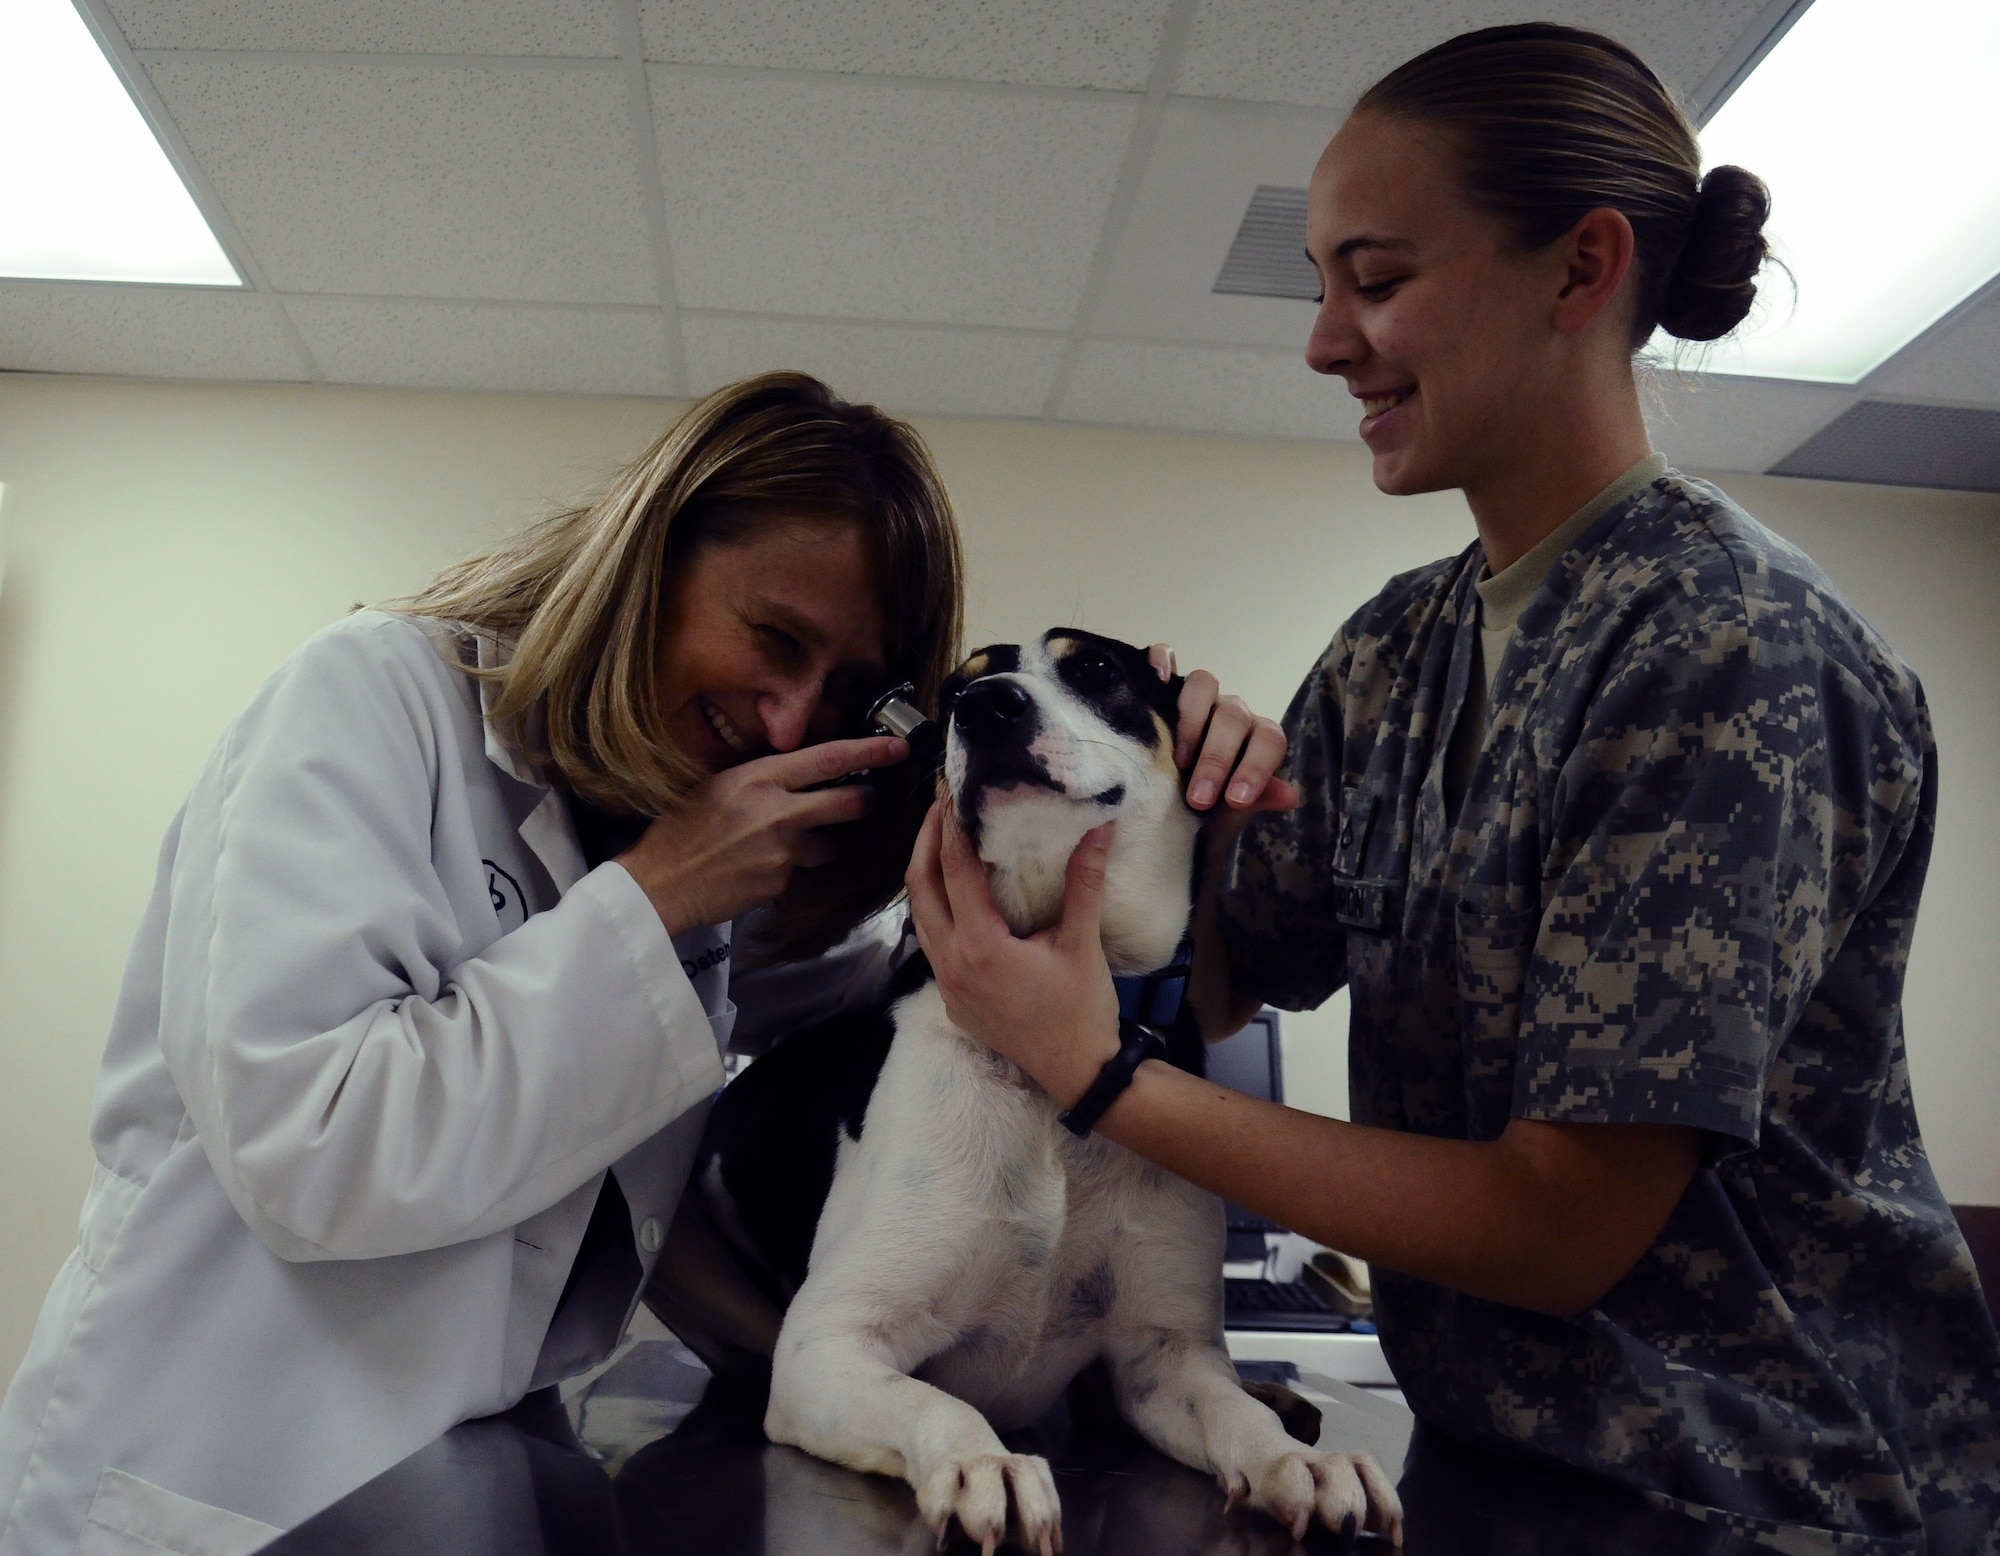 ANDERSEN AIR FORCE BASE, Guam—Dr. Cathy Osten, Public Health Command District Western Pacific civilian veterinarian, examines a canine’s ear with the assistance of Pfc. Shelby Coldiron, Public Command District WESPAC animal care specialist at the Andersen Air Force Base veterinary treatment facility, Jan. 24, 2013. The veterinary treatment facility is responsible for the health of Andersen’s military working dogs, Department of Defense working animals and provides care to privately owned pets. (U.S. Air Force photo by Airman 1st Class Mariah Haddenham/Released)

